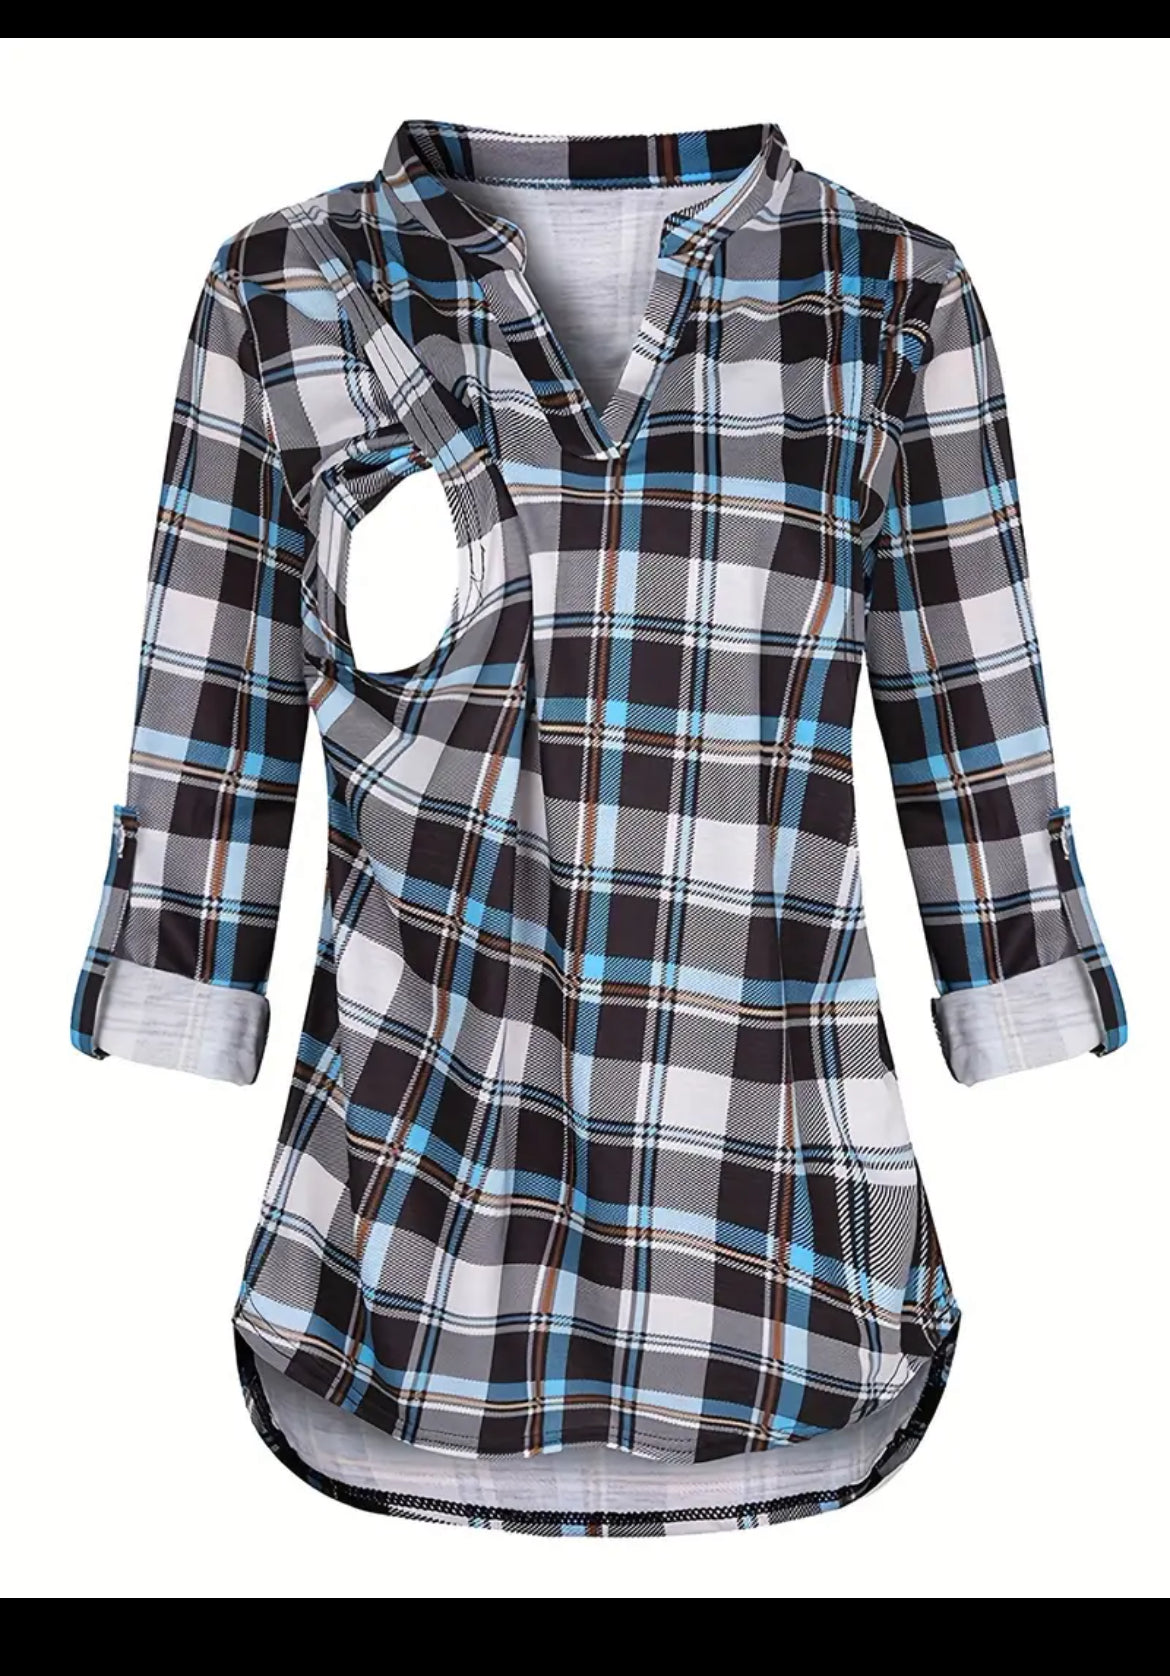 Stylish Plaid Maternity Nursing Shirt With Side Split For Breastfeeding, Baby 🌟🌙 Bumps Maternity Collection